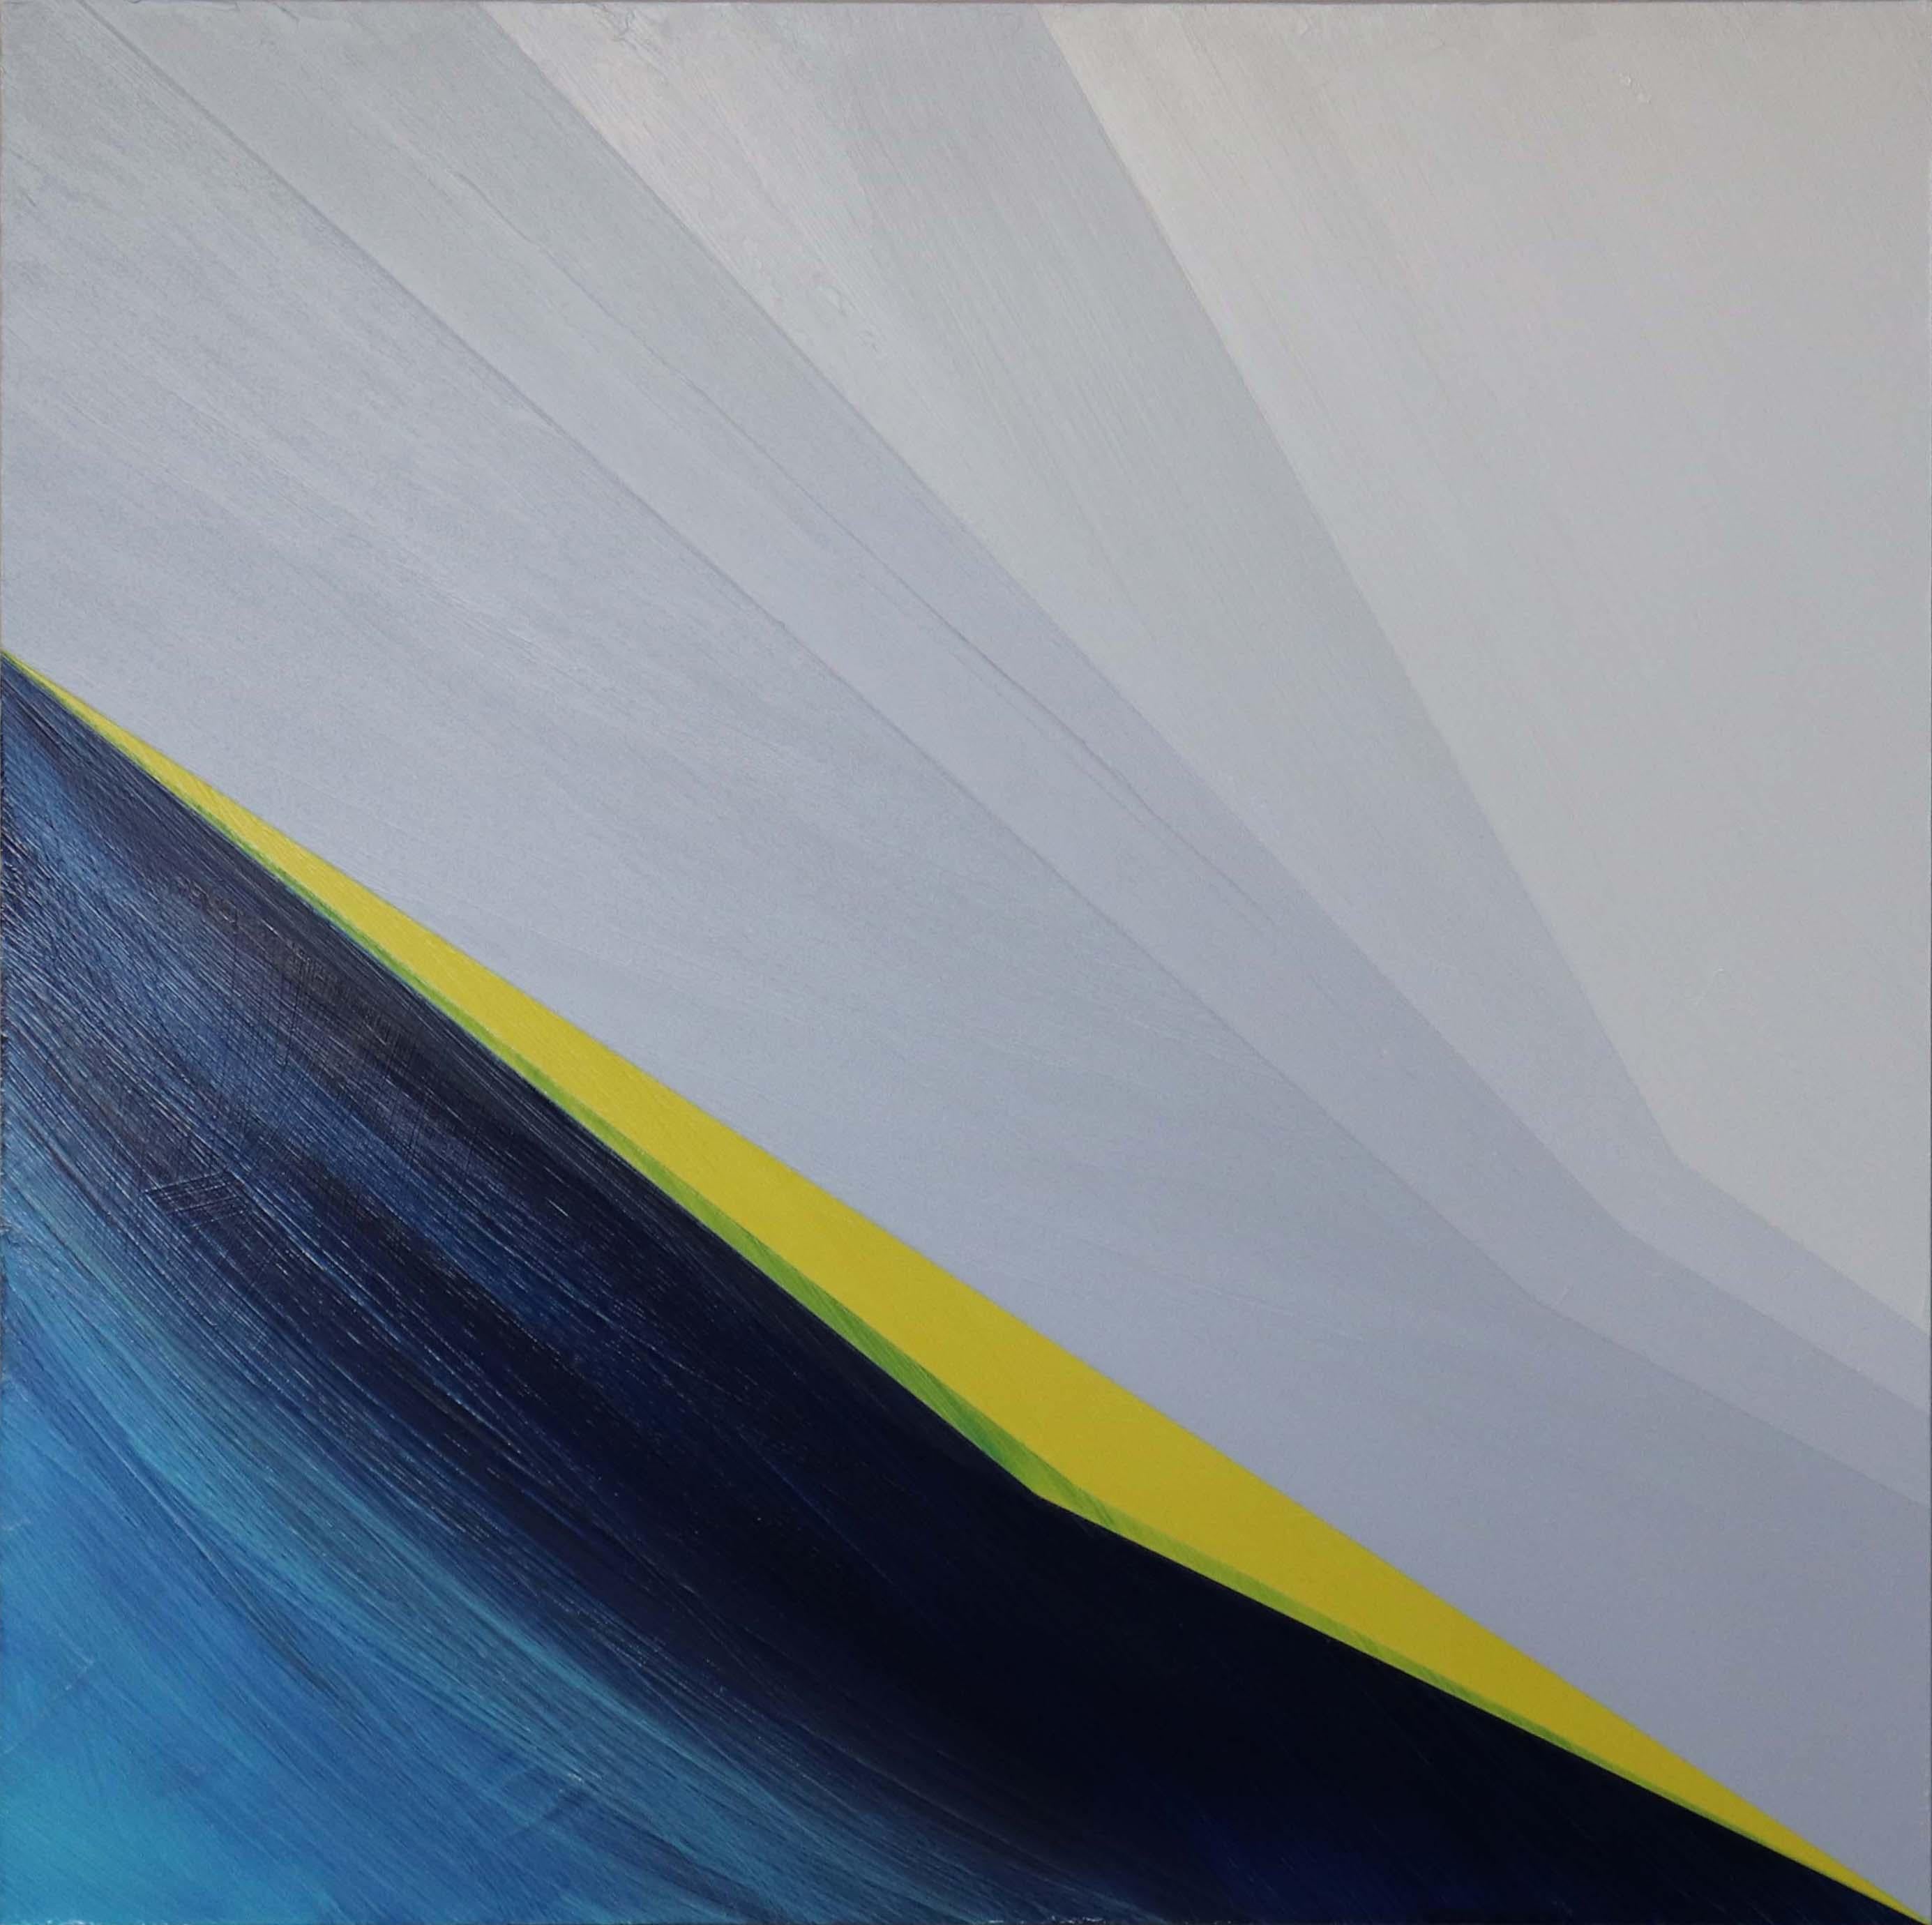 This acrylic on panel painting by Bryan Boone is the fourth in a series of balanced oppositional design. Primary colors are hues of blue, yellow, white and grey. The design is a diagonal geometric color field.

"Arrangement Impulsion'' is a series